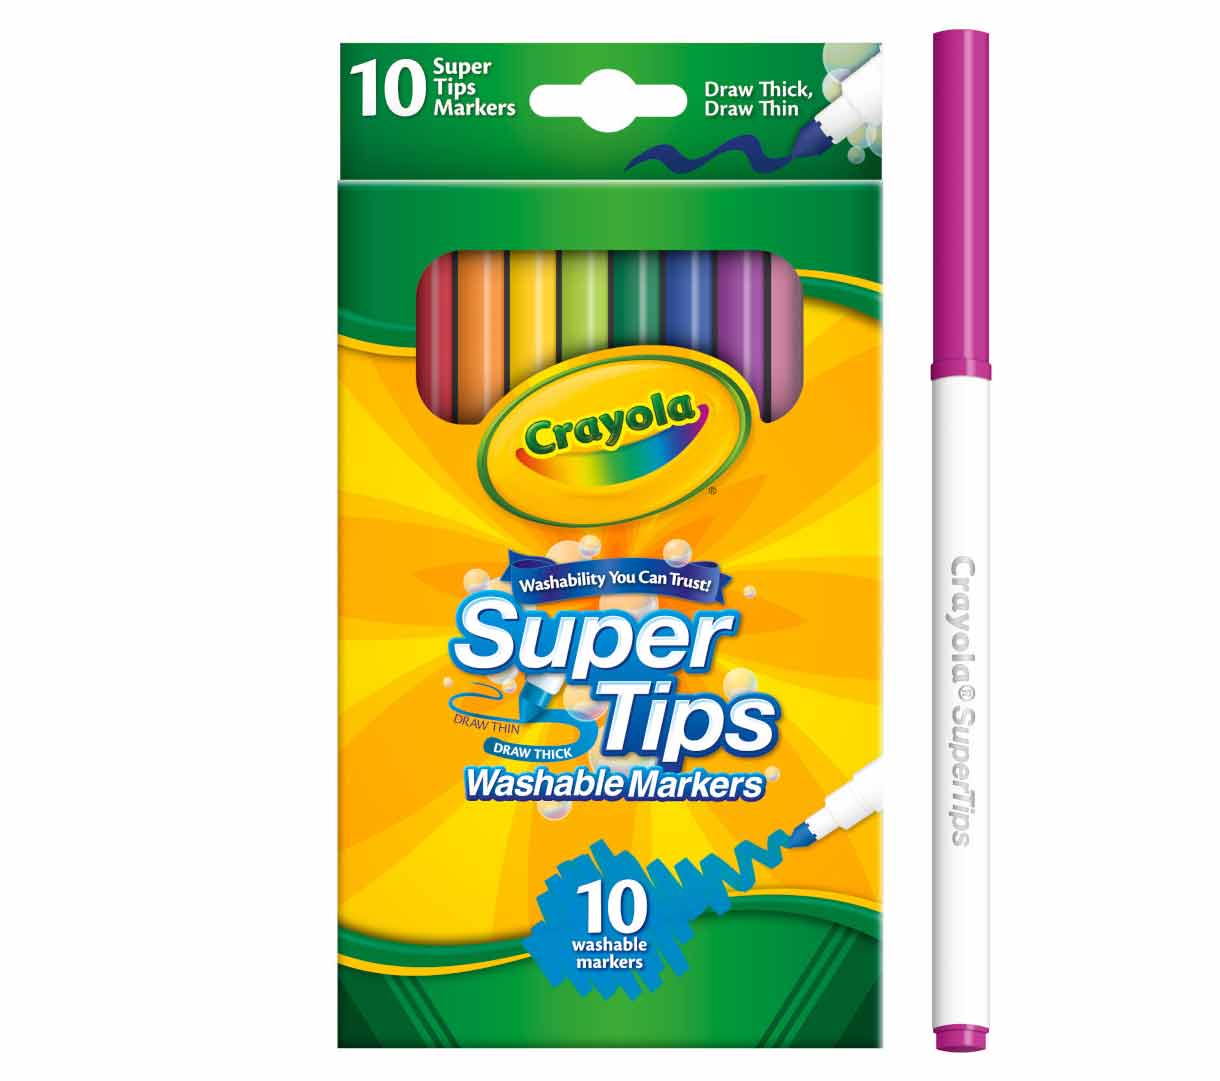 Crayola Super Tips 10-color Washable Markers